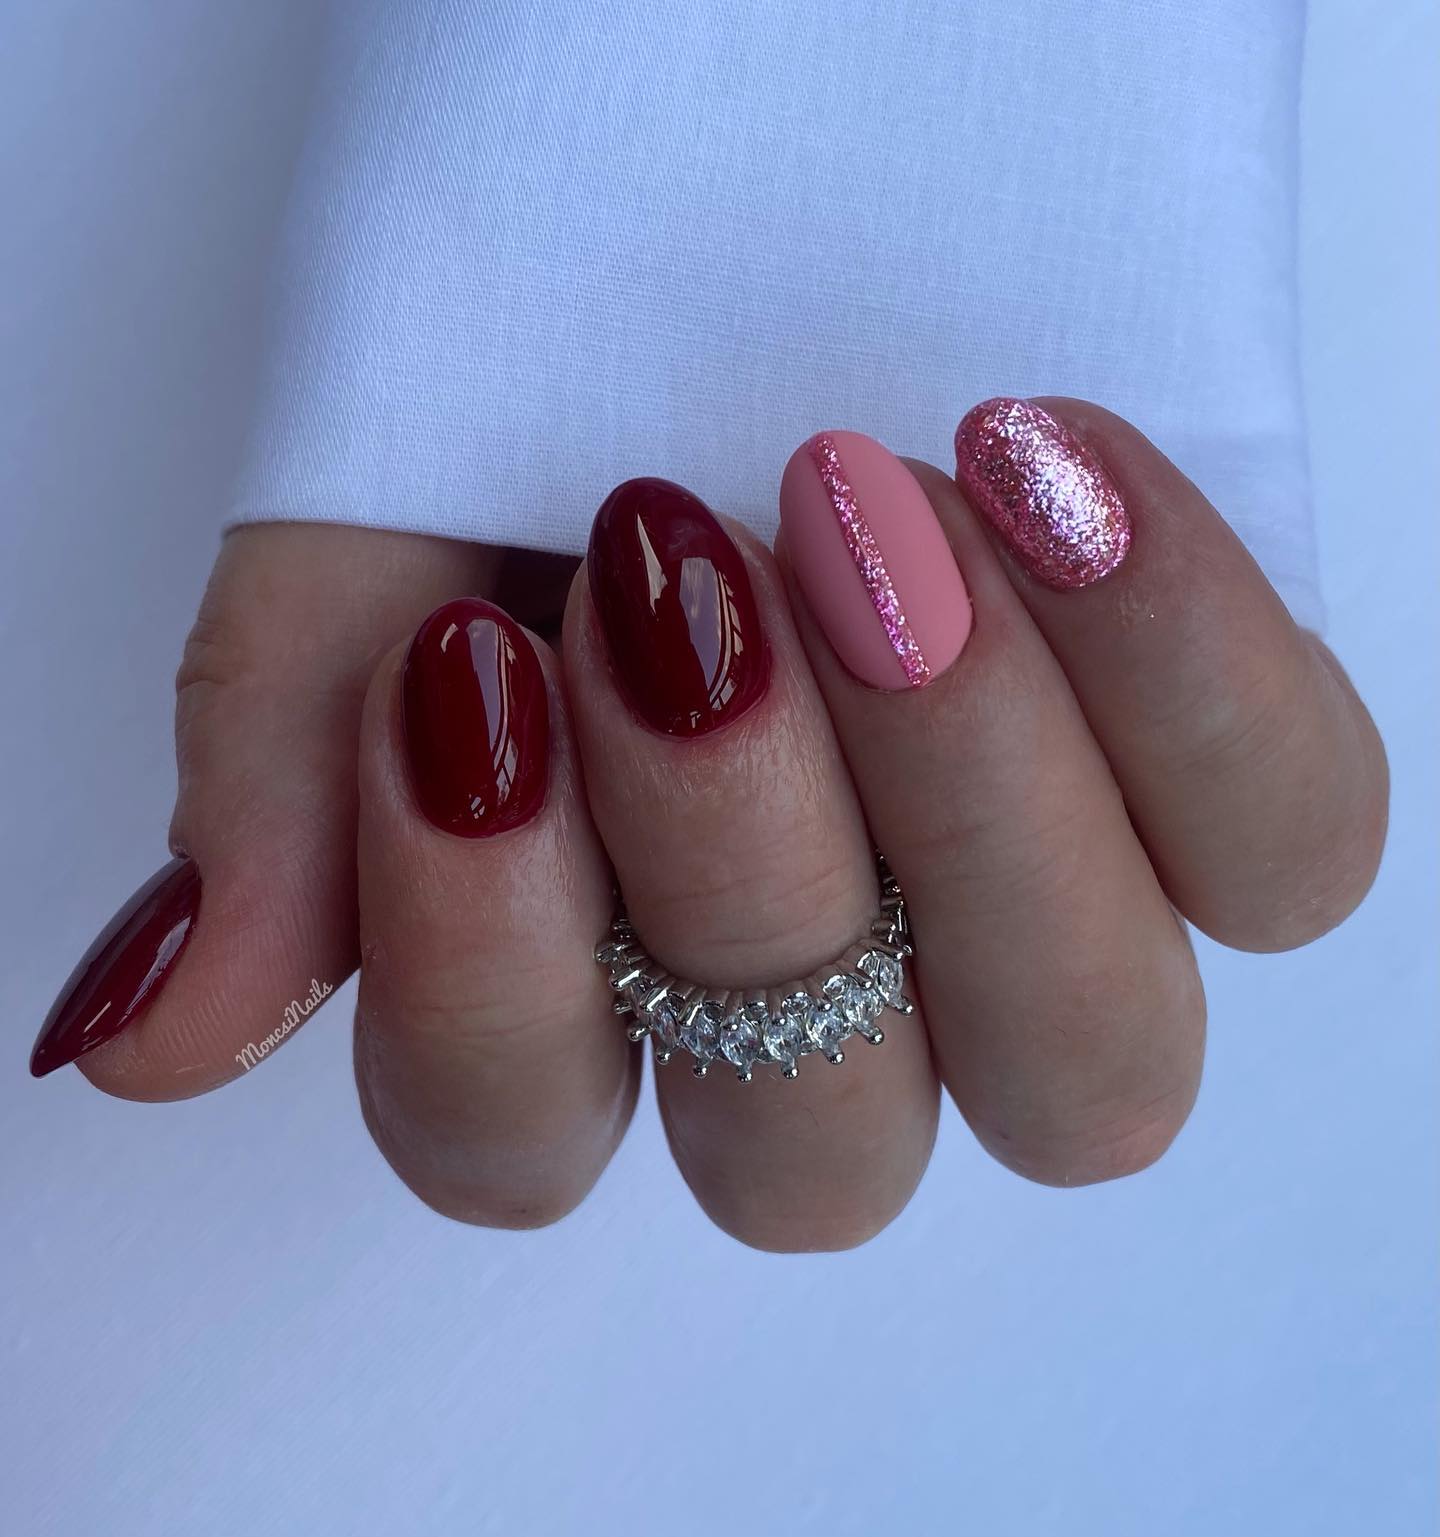 Red and pink nails are colors that are very popular in the nail art world. These colors give off warm and positive energy. Let's mix them on your short nails with glitters!